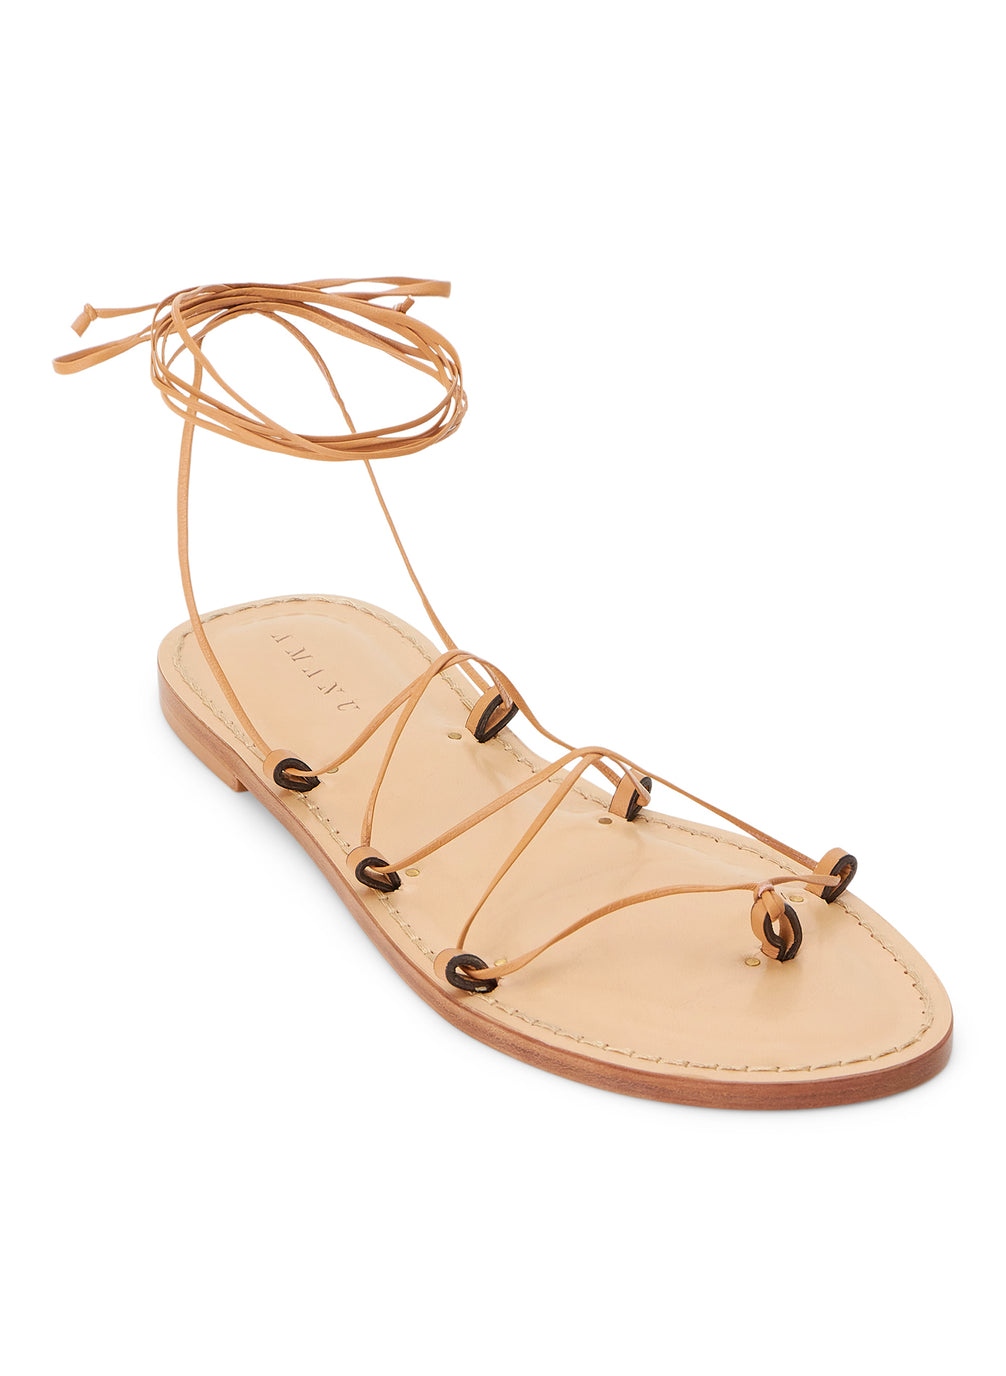 front view of a tan sandal with tan wrap strings